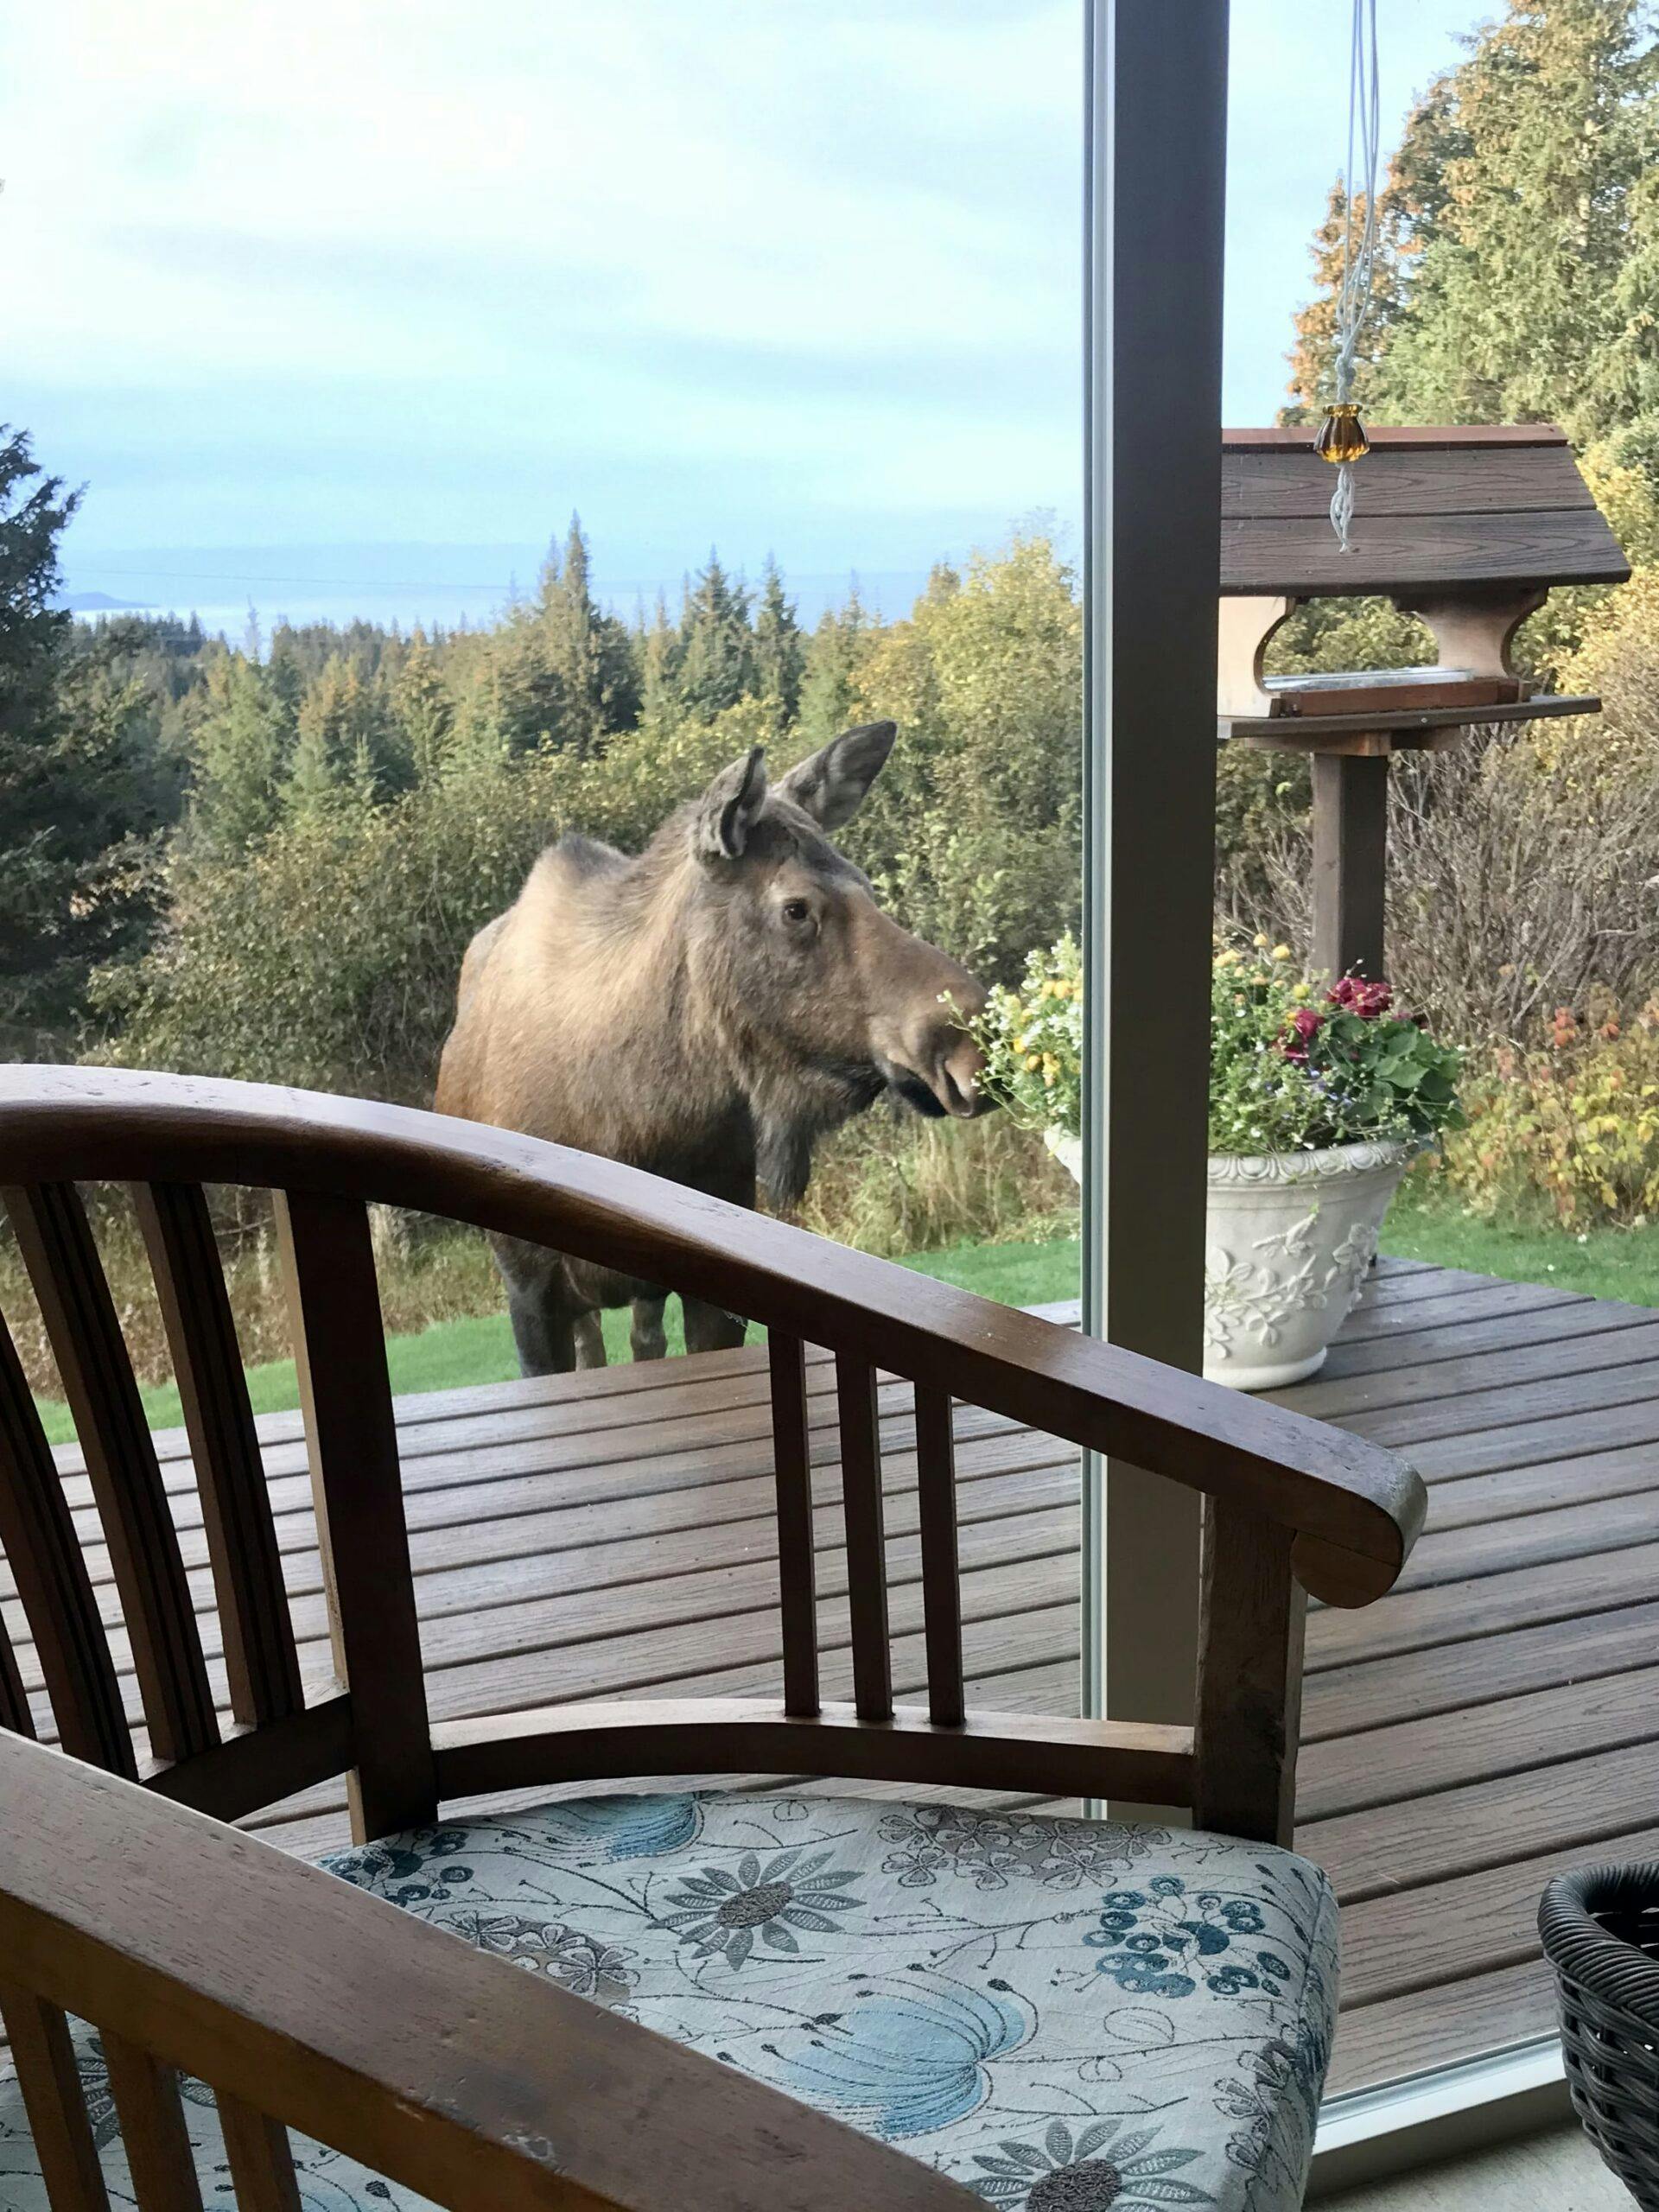 Moose standing beside porch with bird feeder in background.